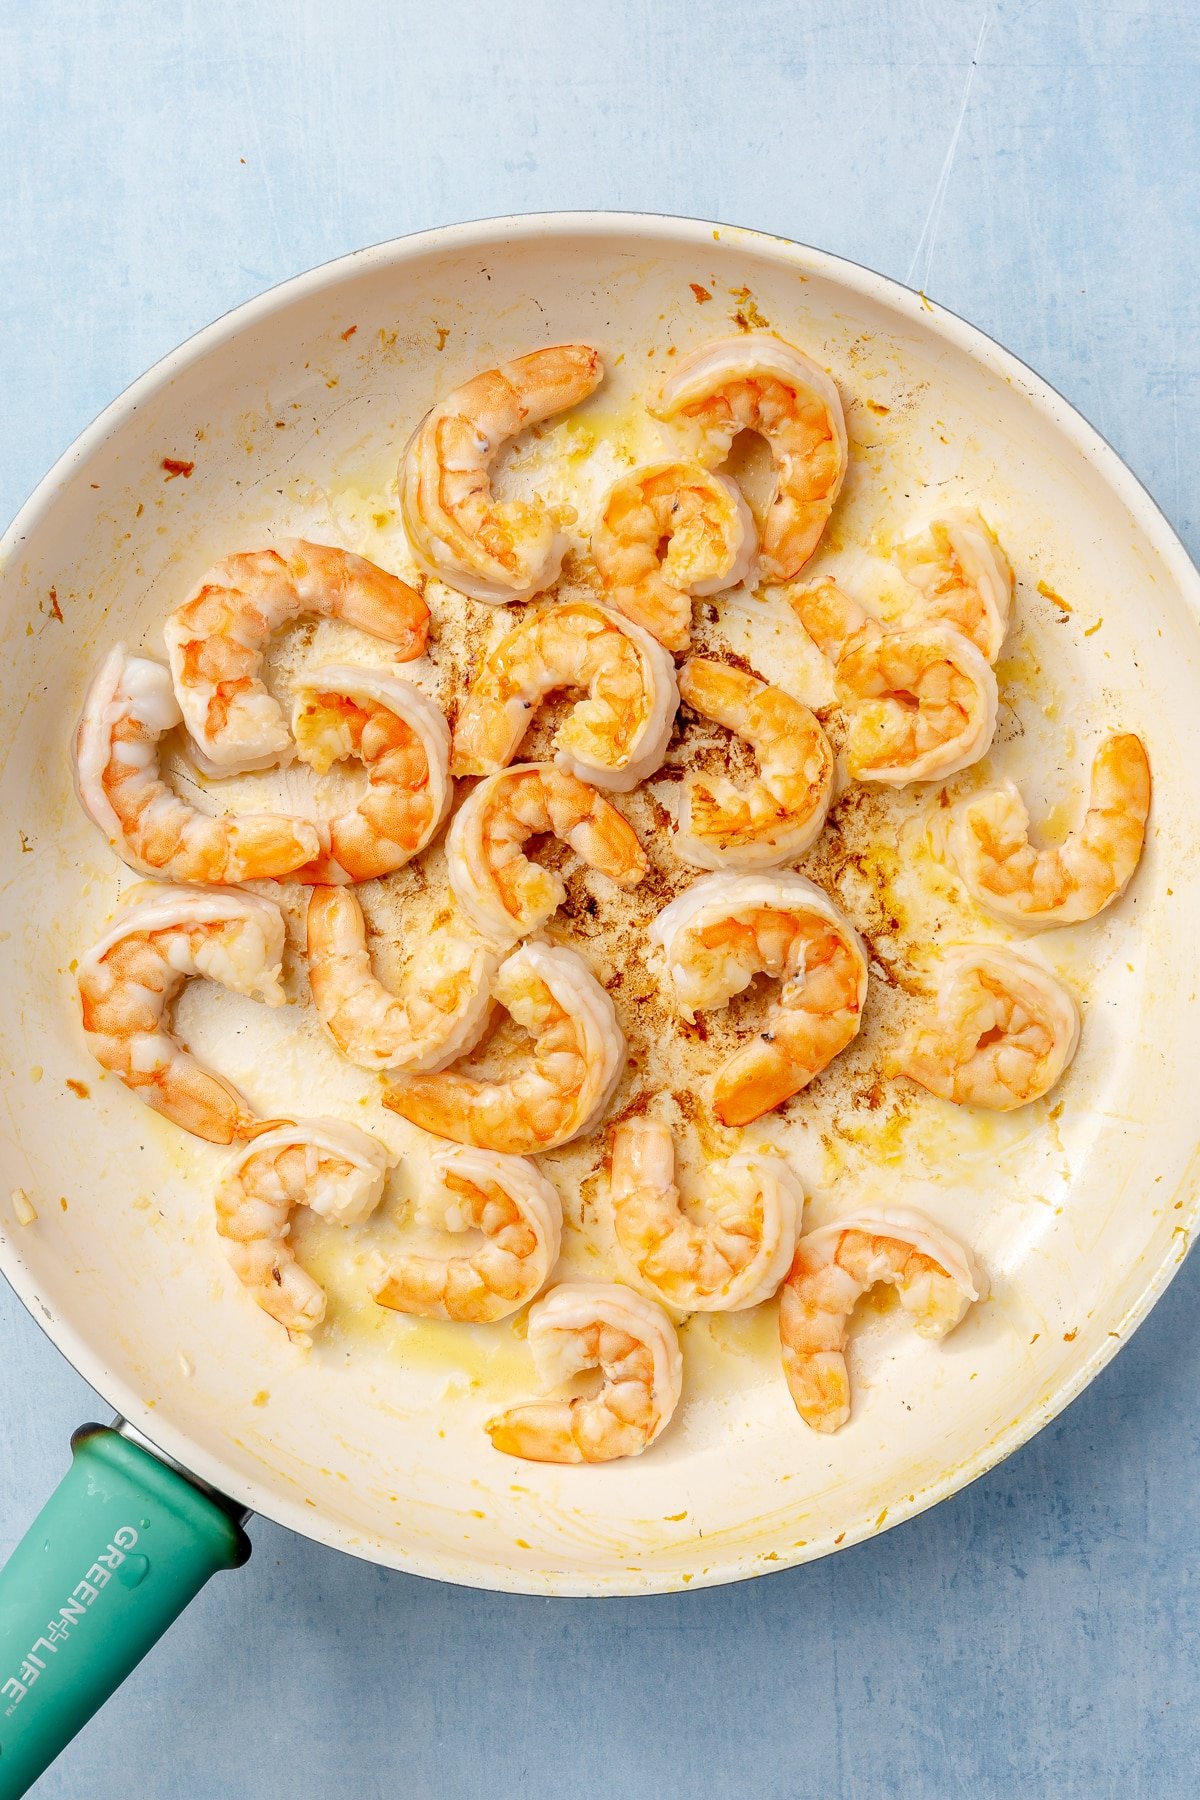 Cooked, lightly golden shrimp, sits in a frying pan with a teal handle.